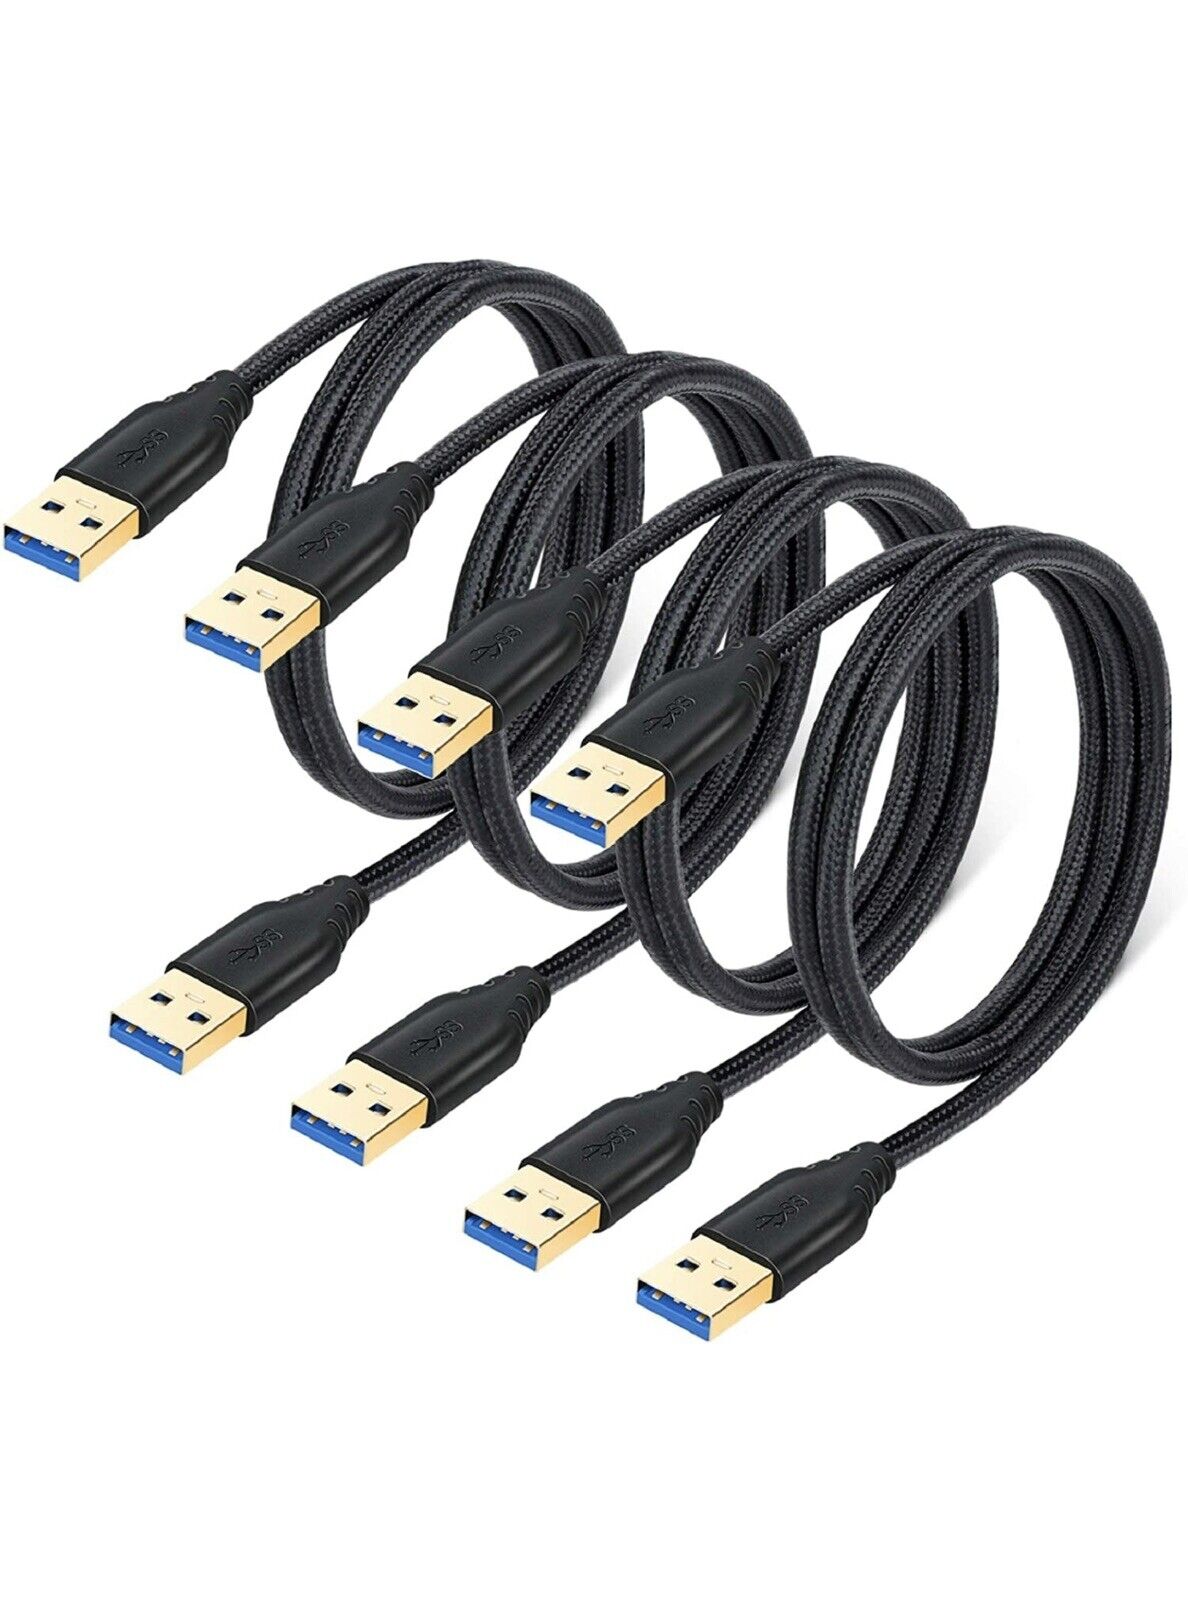 USB 3.0 A to A Braided Cable, 4-PACK 1M/3FT.